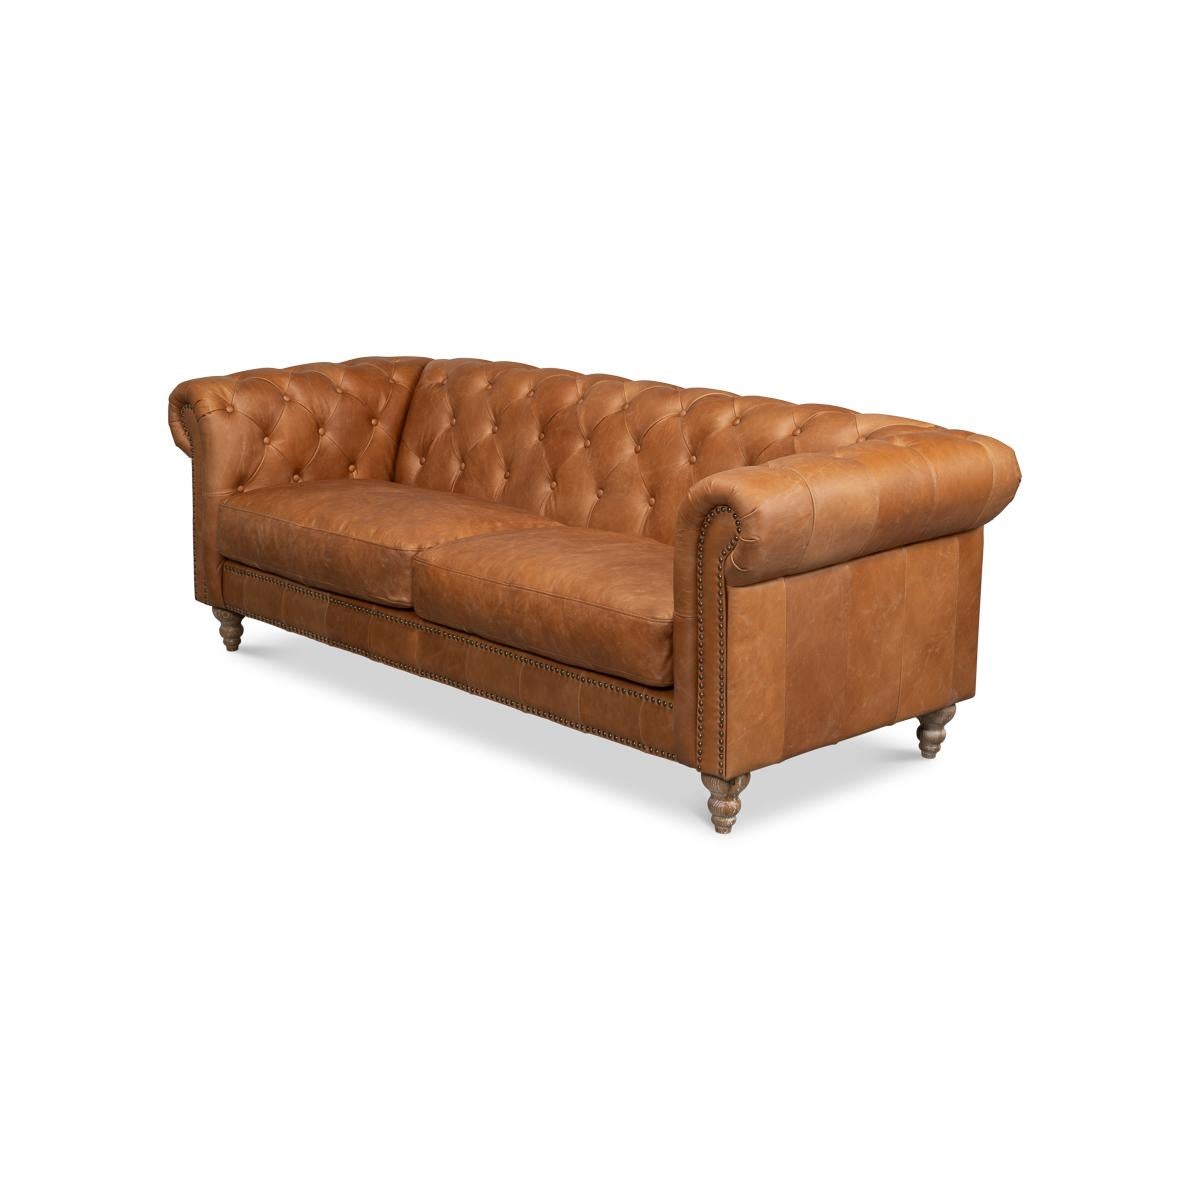 Asian Tufted Leather Chesterfield Sofa For Sale